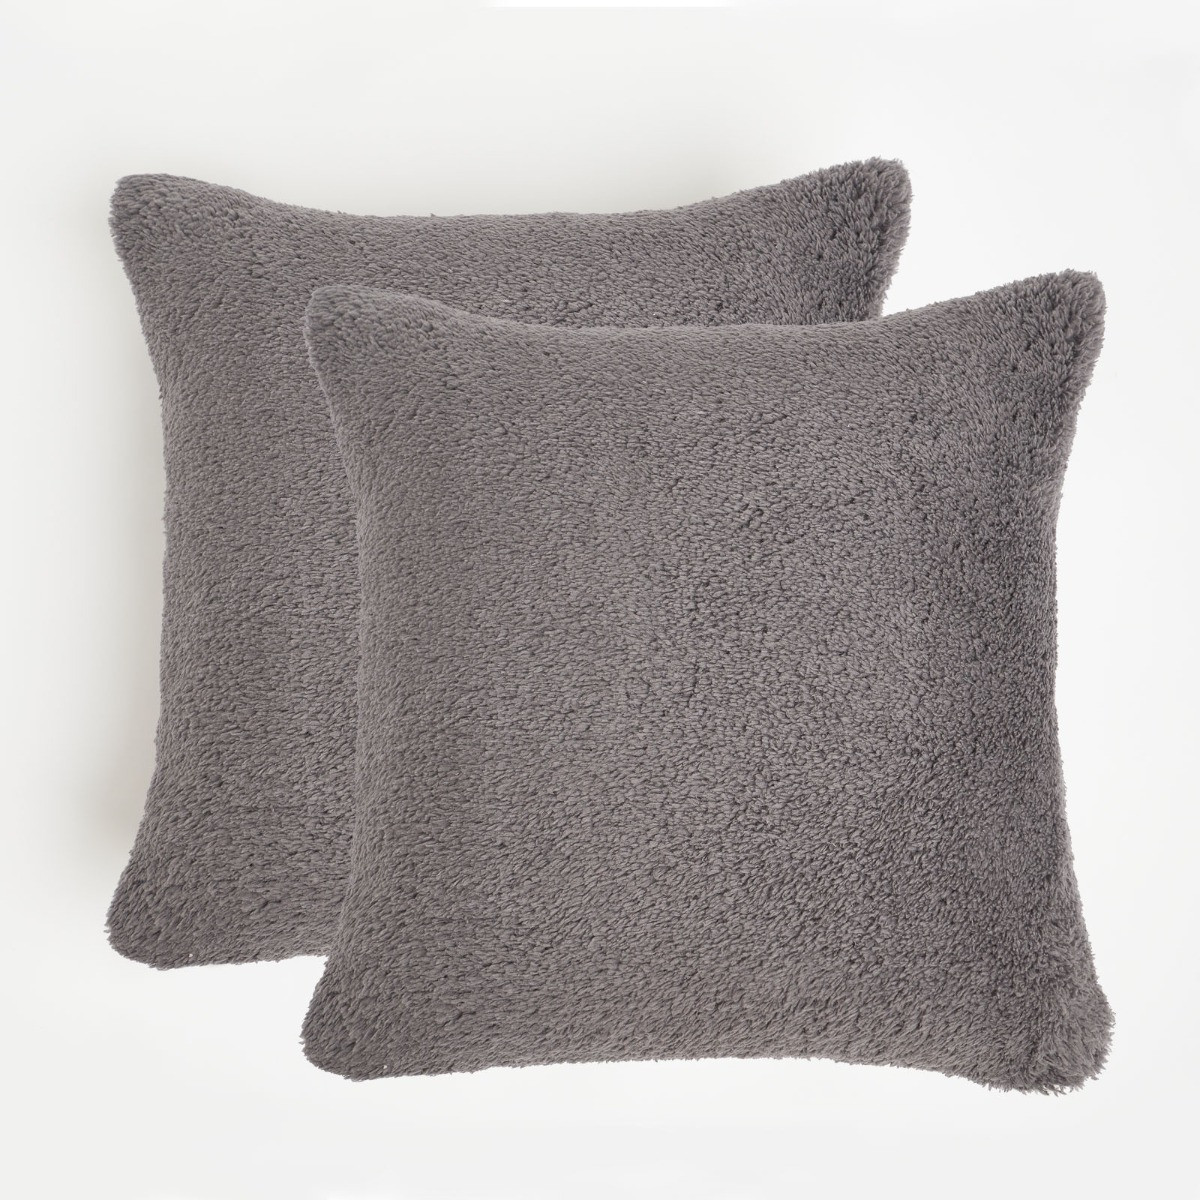 Brentfords 2 Pack Teddy Cushion Covers - Charcoal>